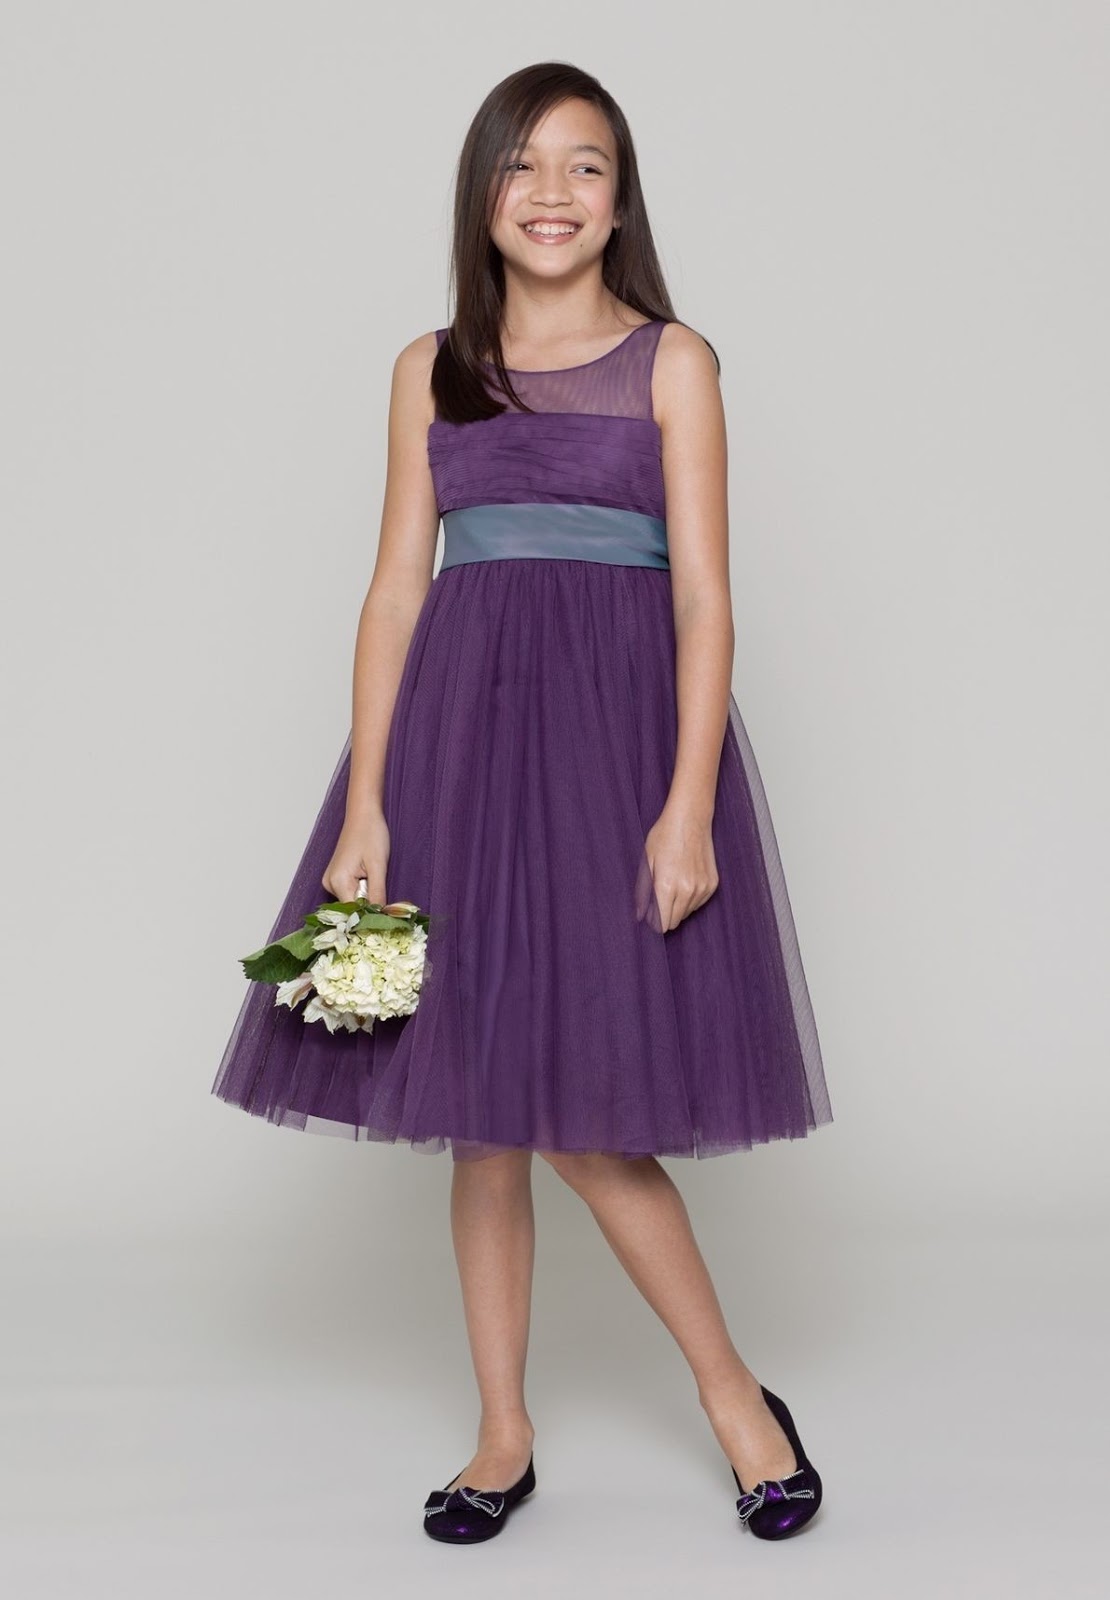 dress is really something good and beautiful for junior bridesmaid to ...